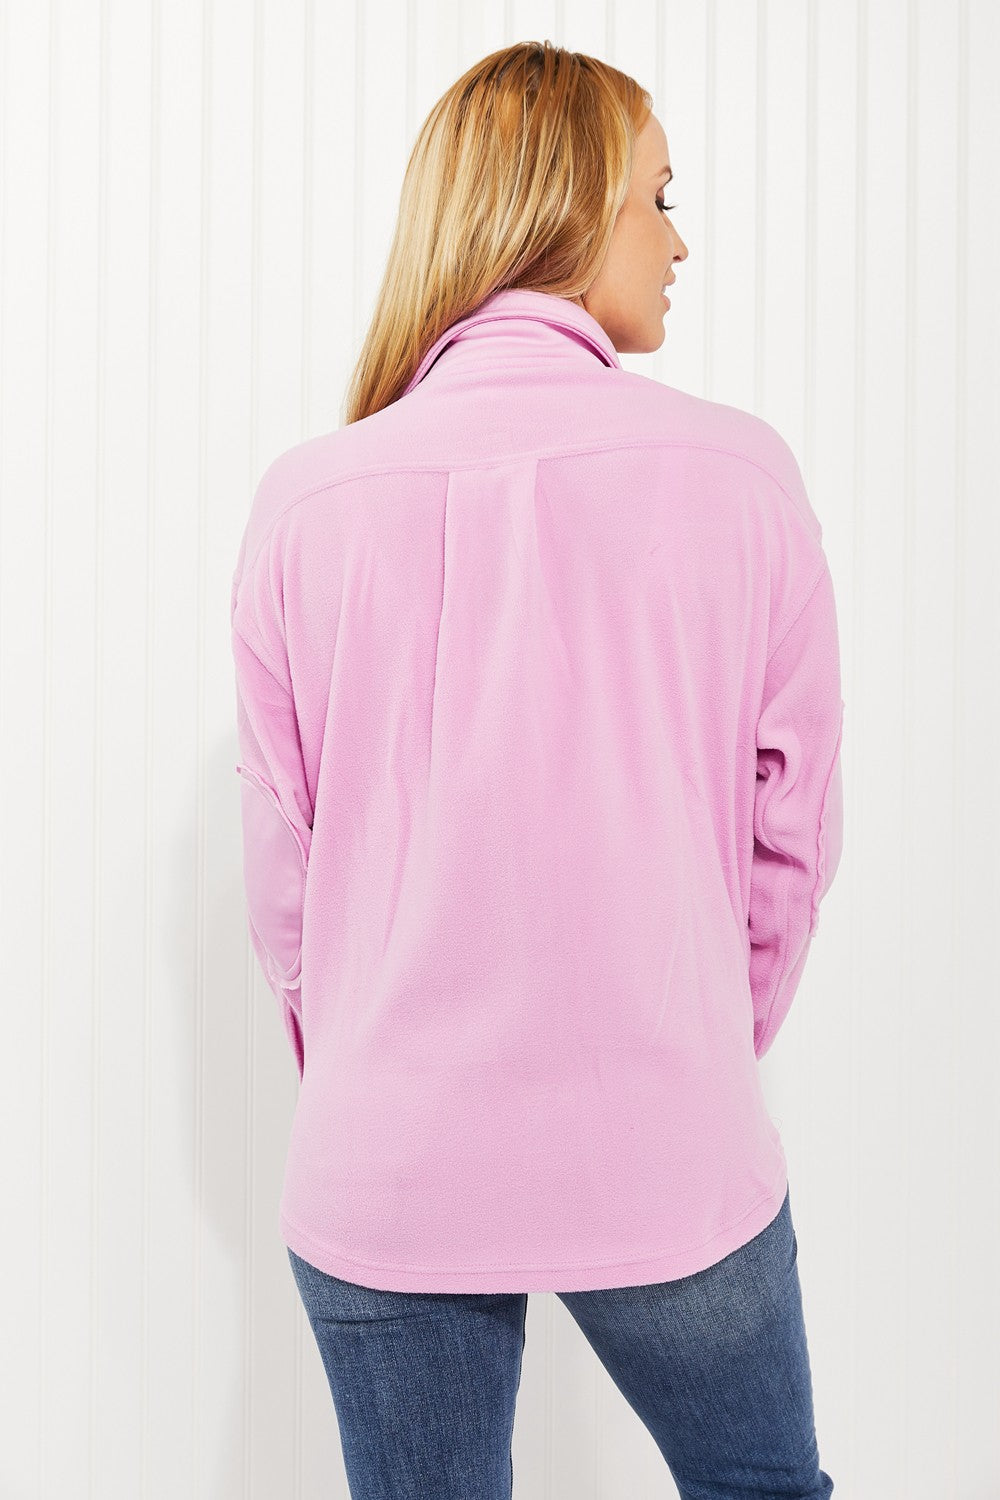 Zenana On the Lookout Elbow Patch Fleece Shacket in Mauve